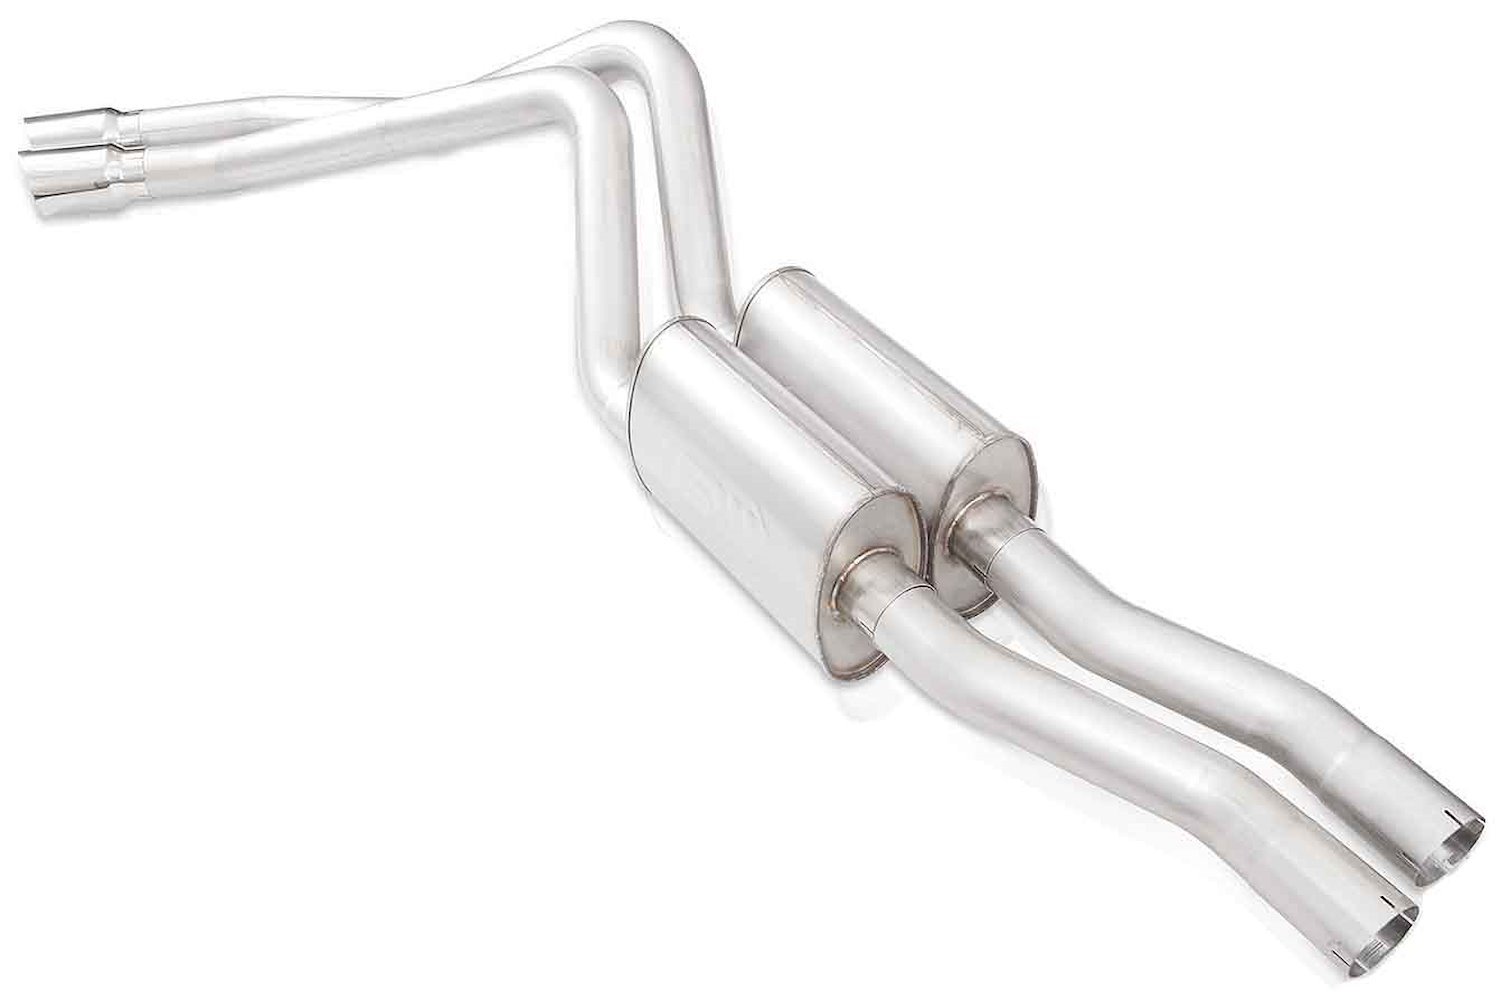 Legend Series Cat-Back Exhaust System 2015-2019 Chevy Tahoe/GMC Yukon 5.3L, 6.2L - Polished Tips - Growl/Rumble Sound